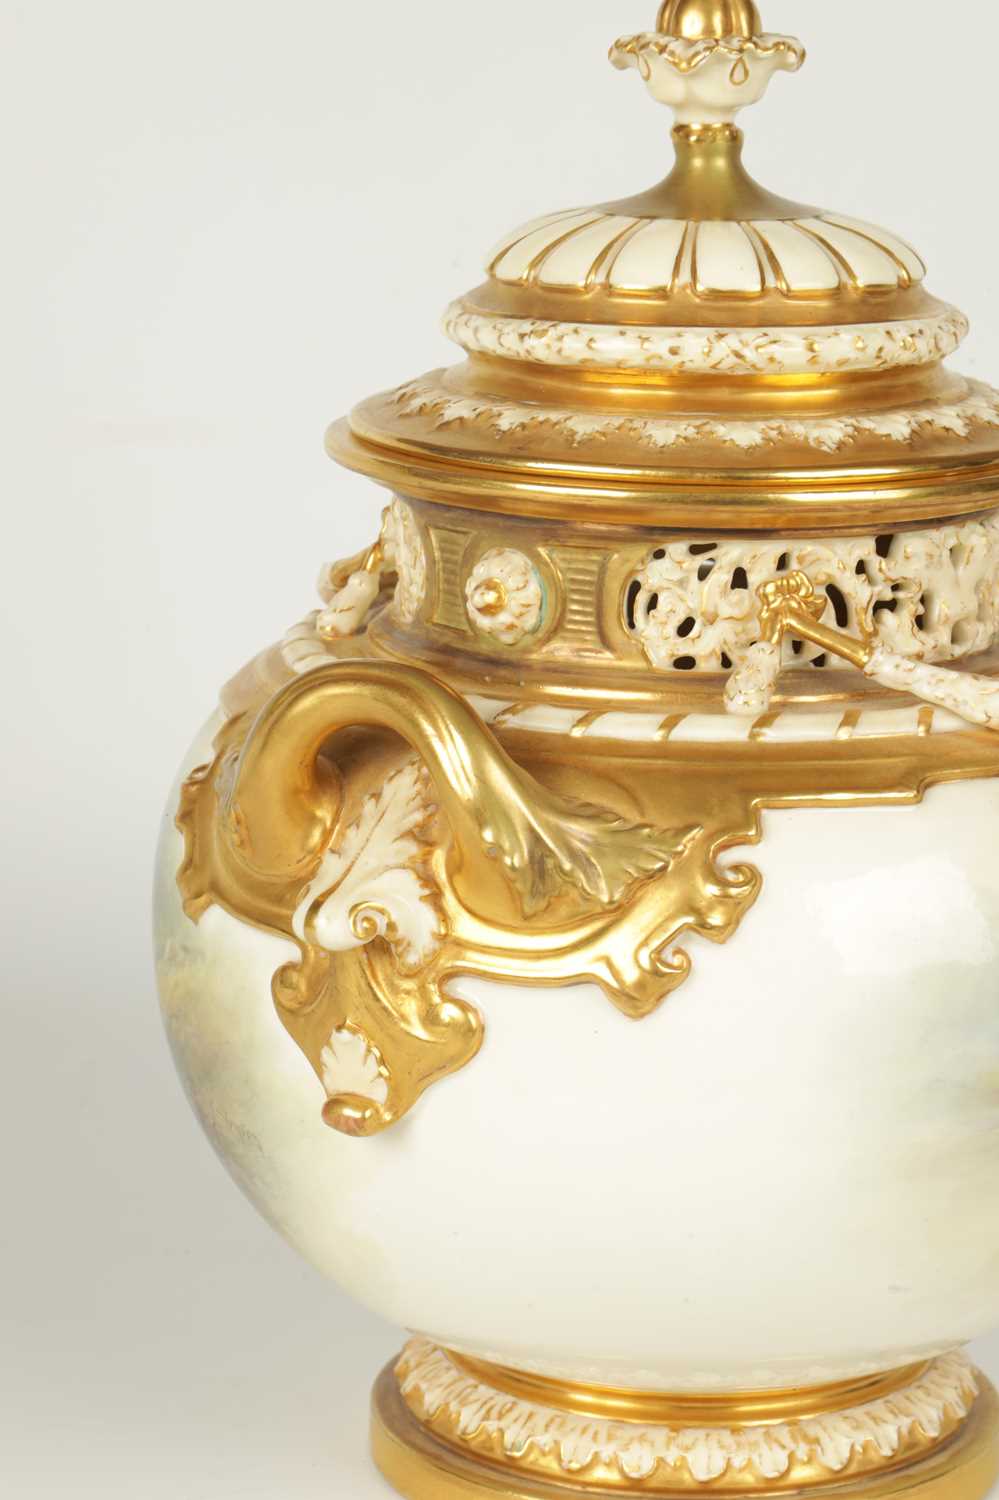 JOHN STINTON. A FINE RICHLY GILT, RELIEF MOULDED TWO HANDLED BULBOUS BLUSHED IVORY POT POURRI CABINE - Image 6 of 11